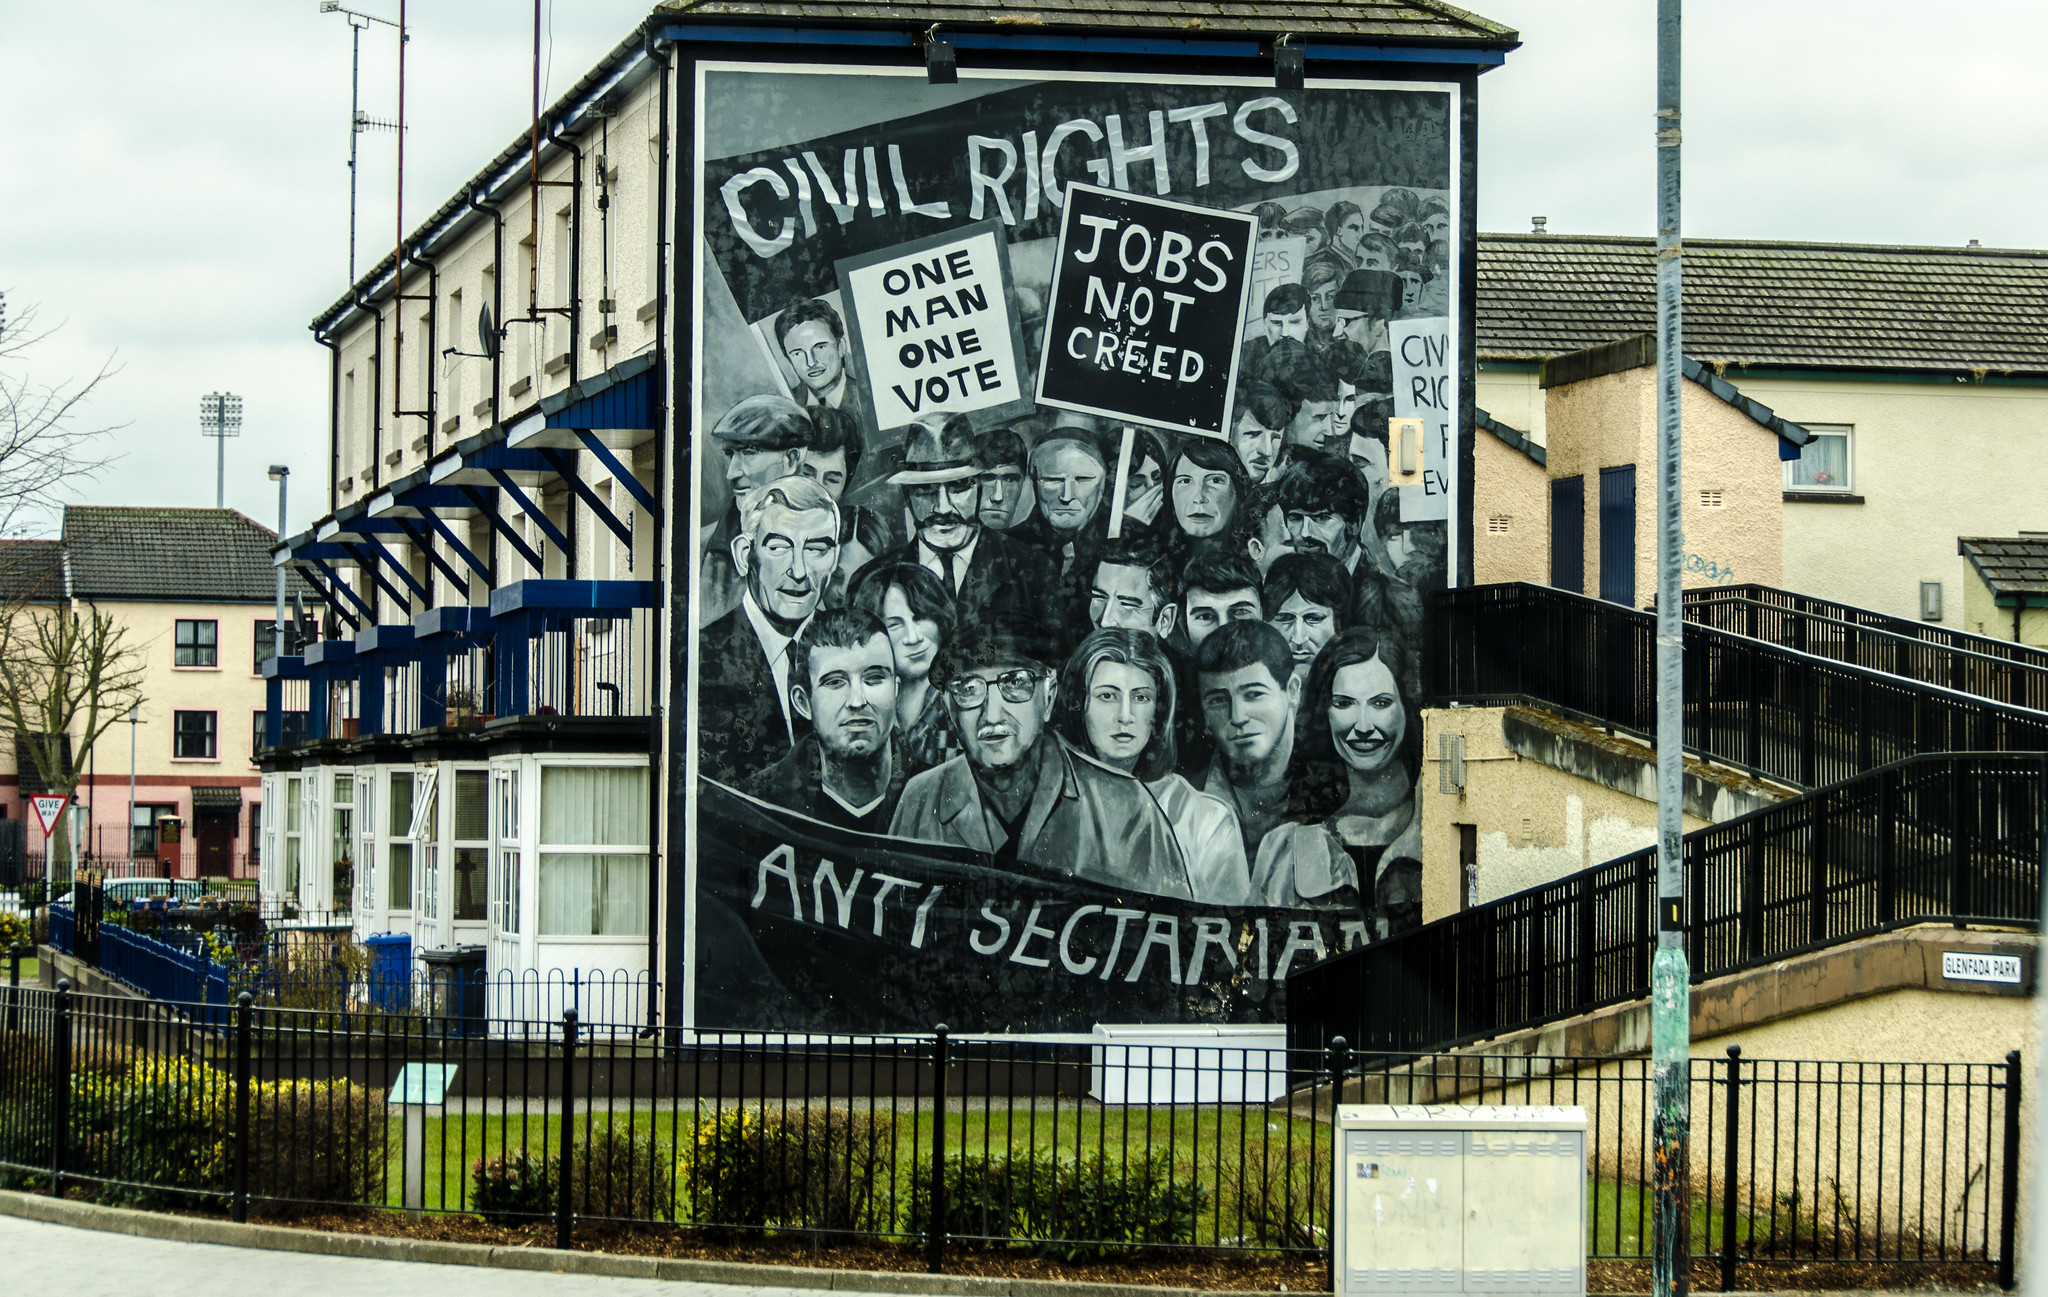 Anti sectarian banner Image Flickr master phillip